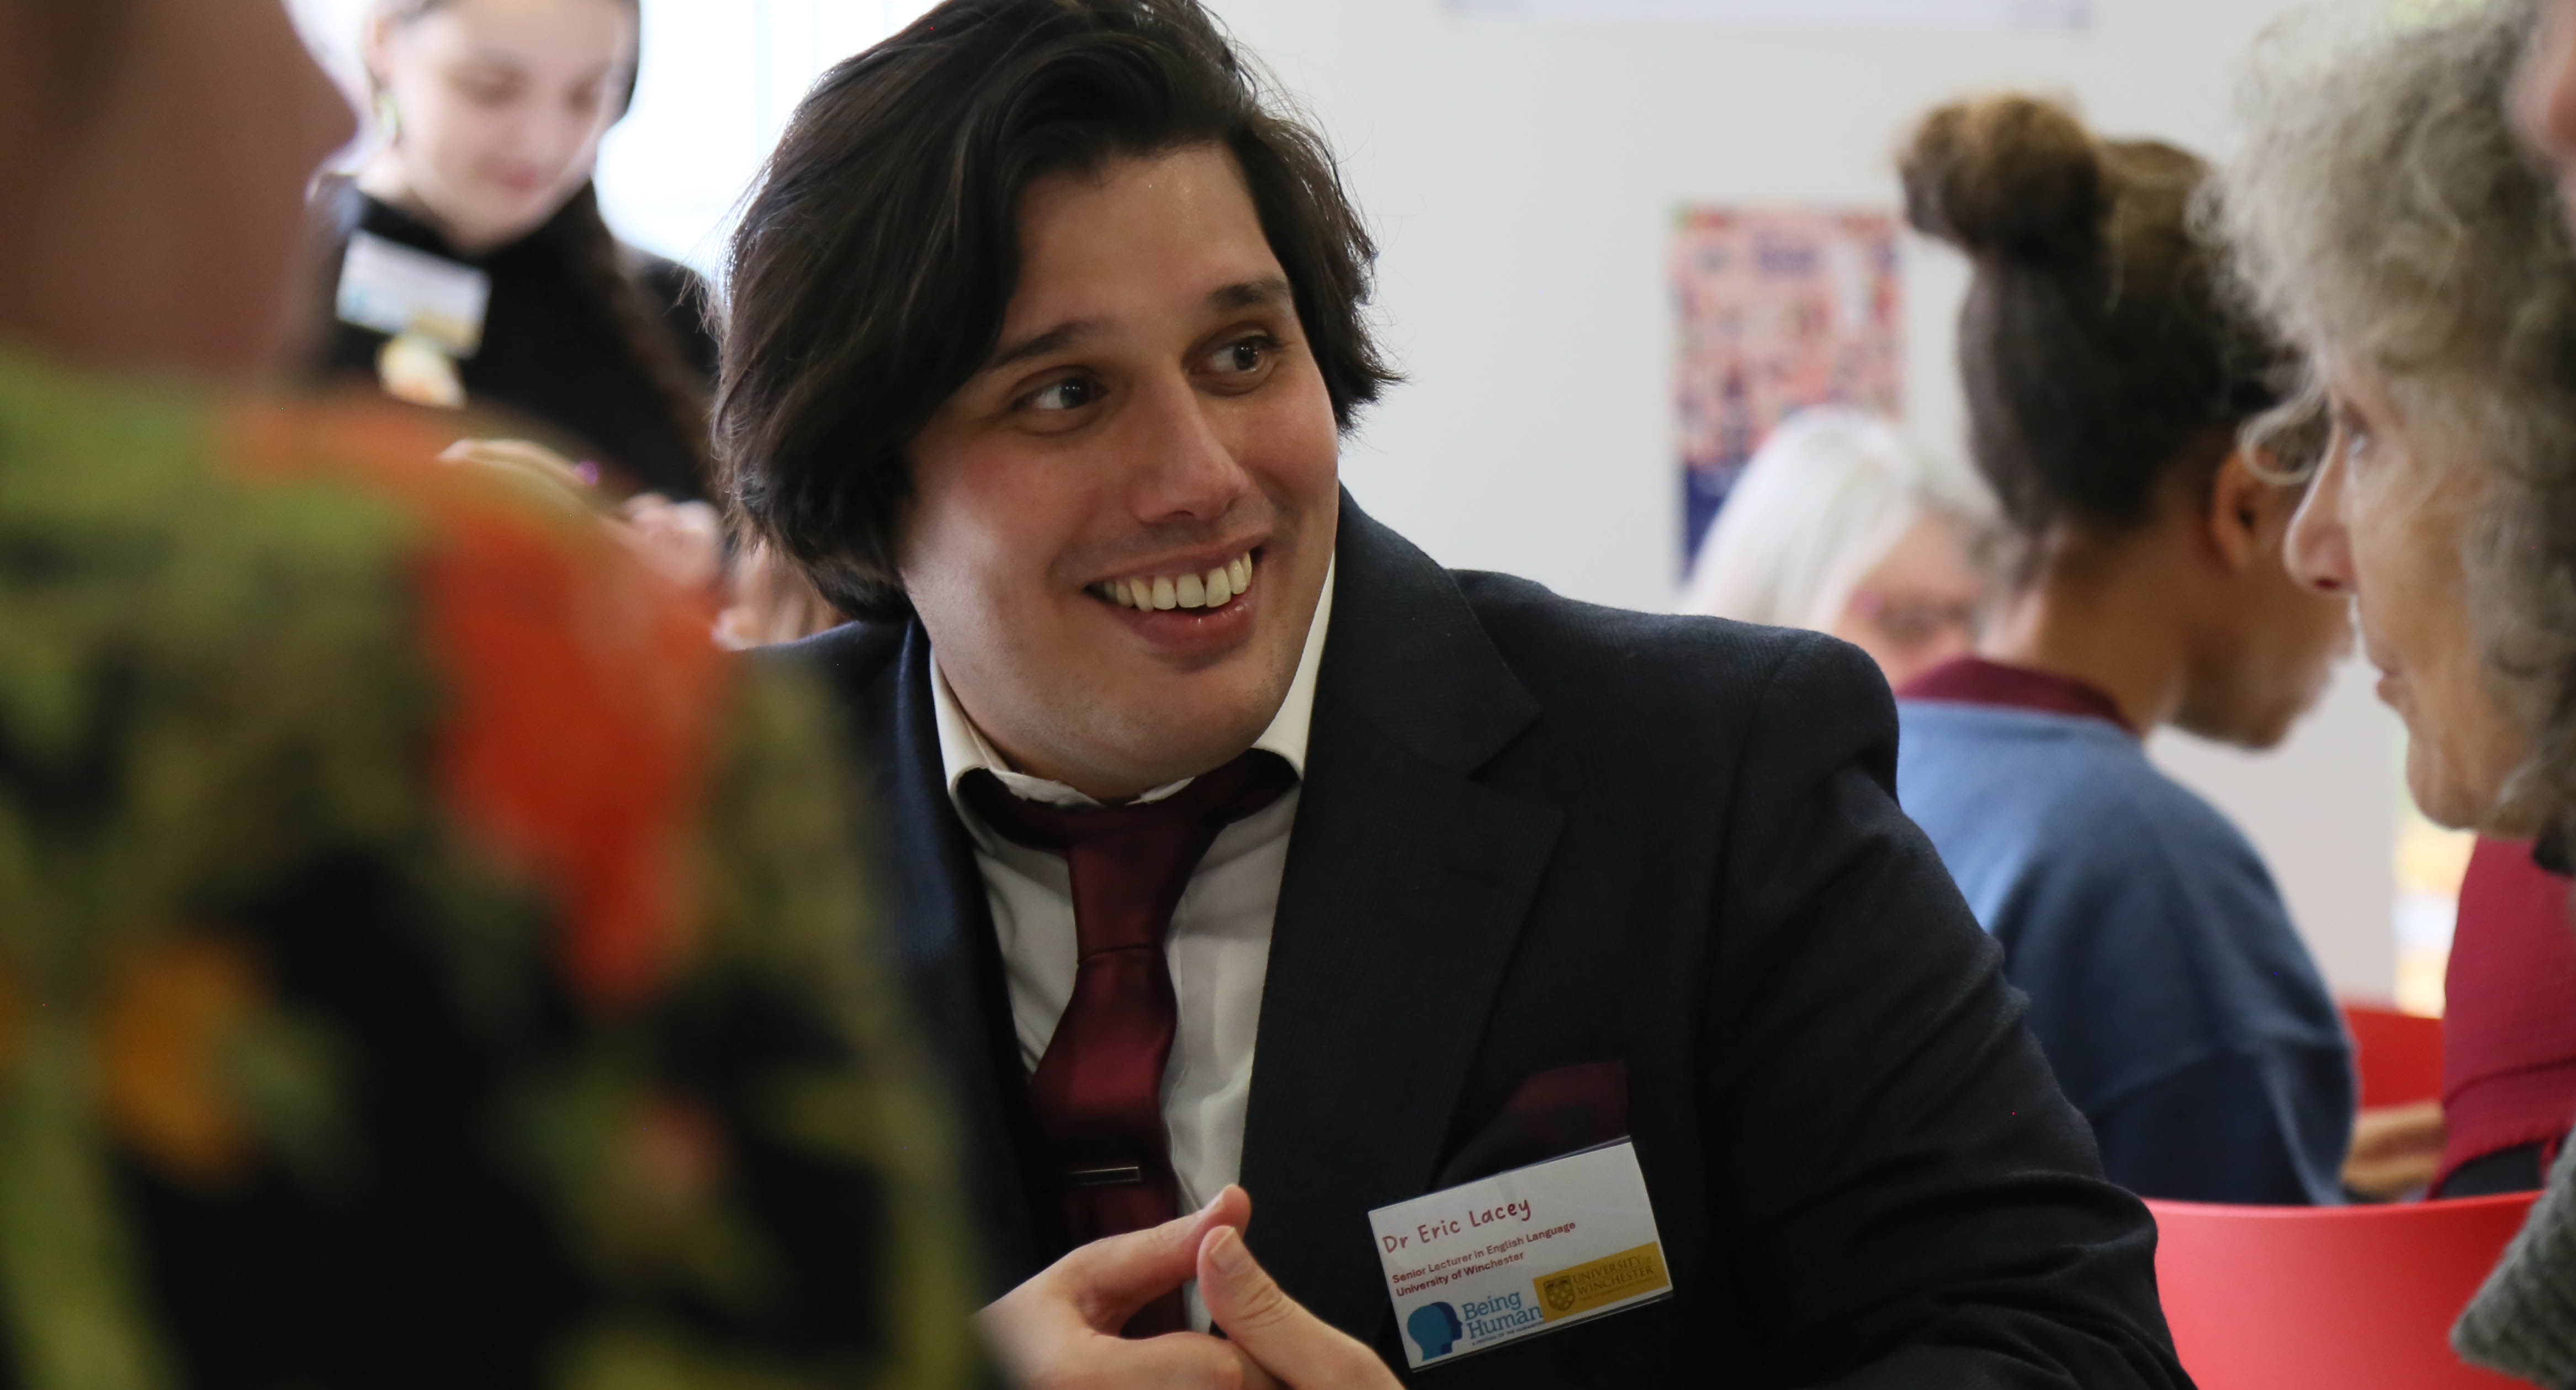 University of Winchester linguist Dr Eric Lacey smiling while talking to members of the public at an event